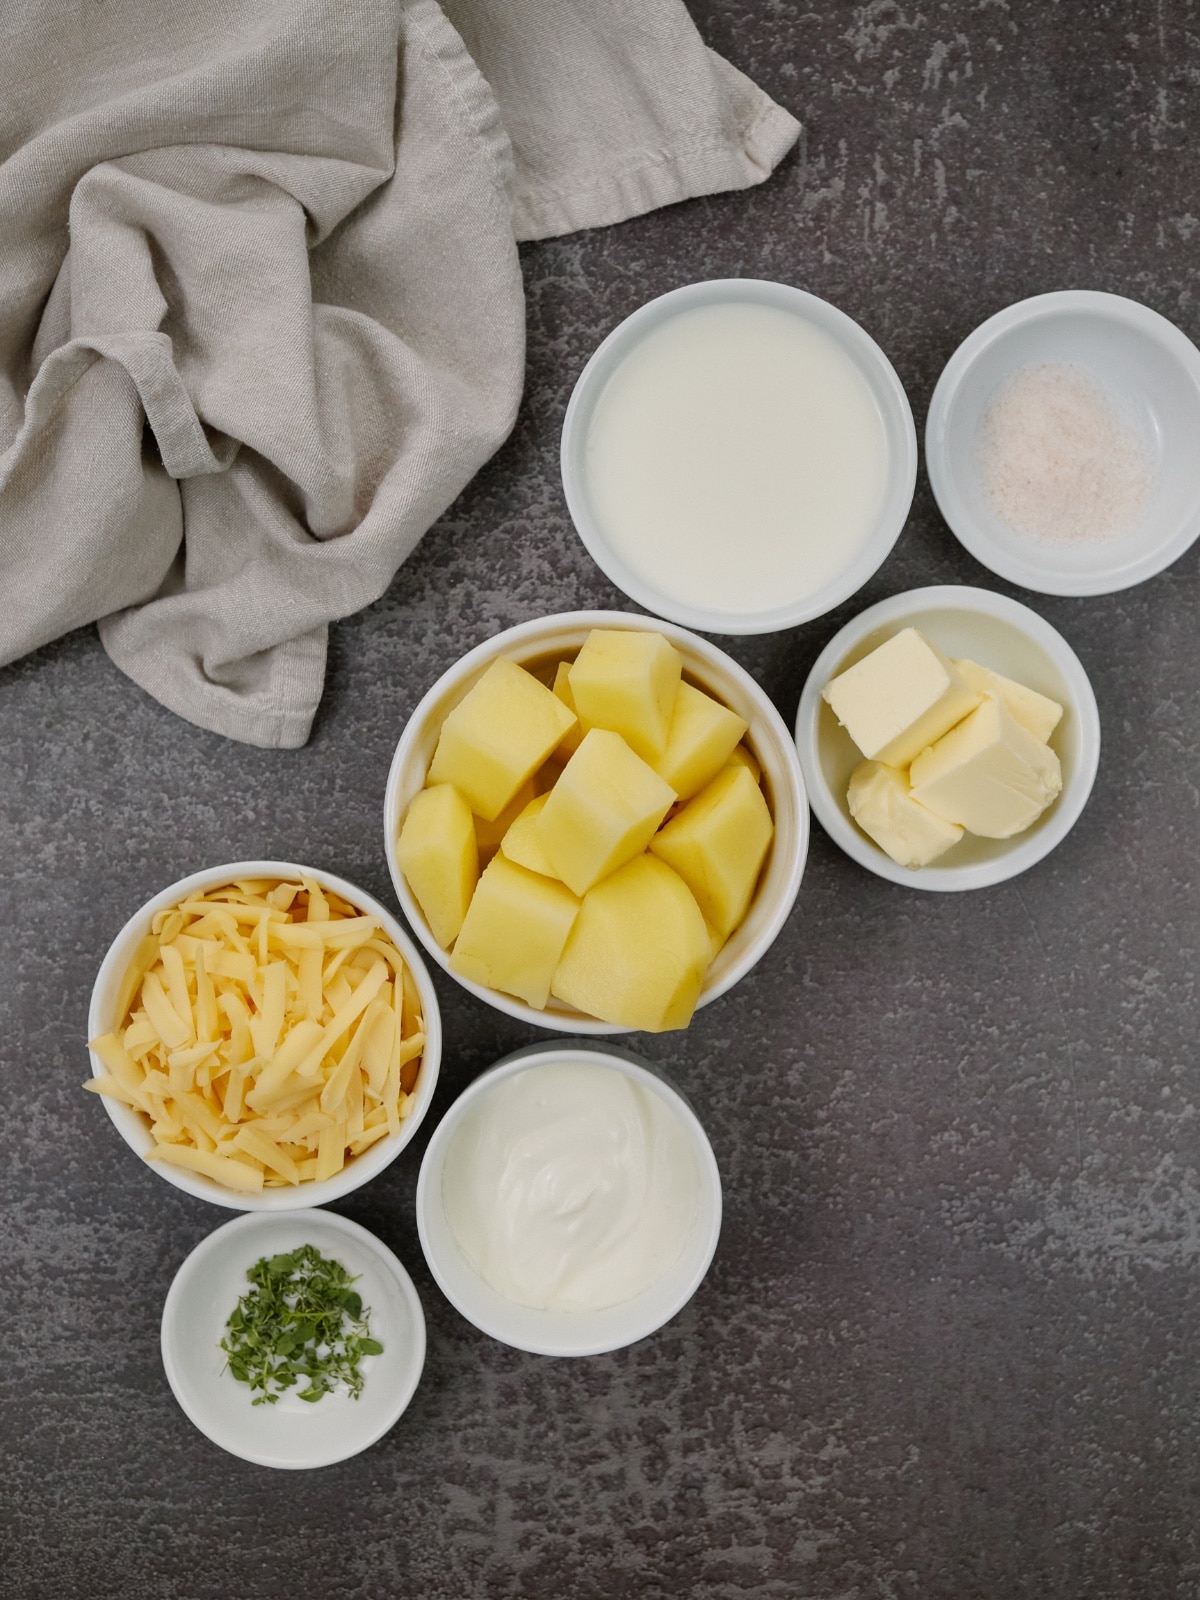 ingredients for mashed potato casserole in small white bowls